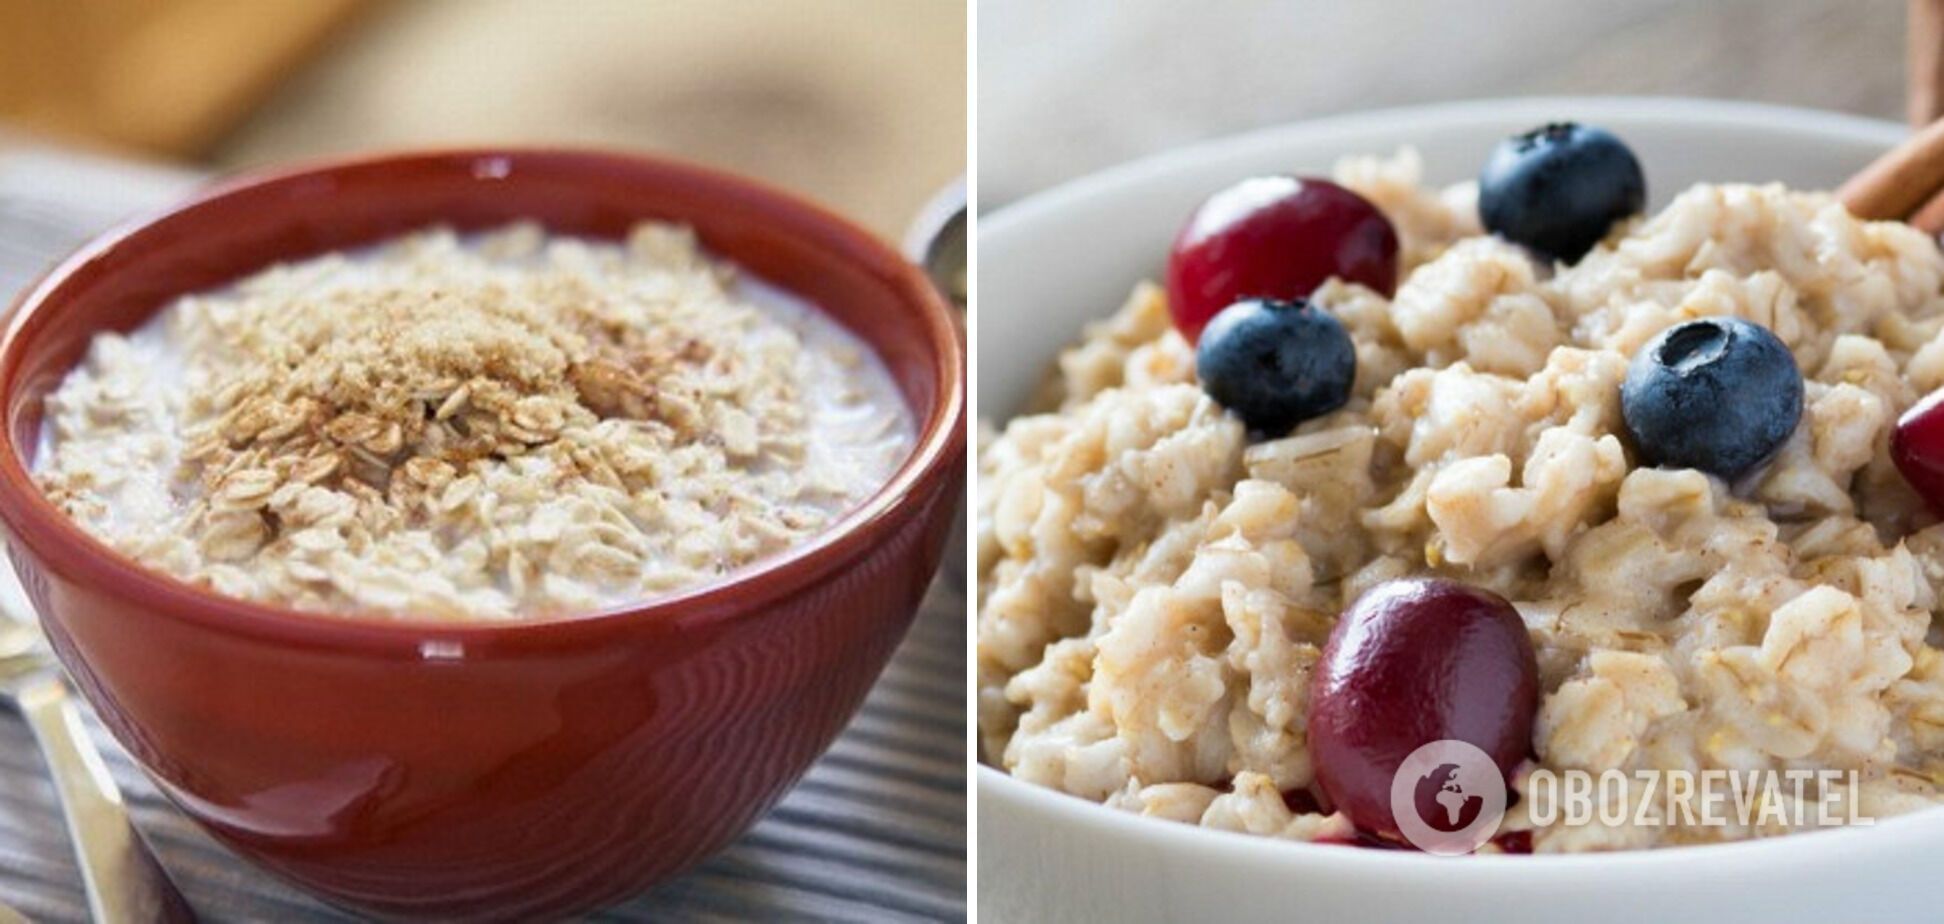 How to cook oatmeal deliciously